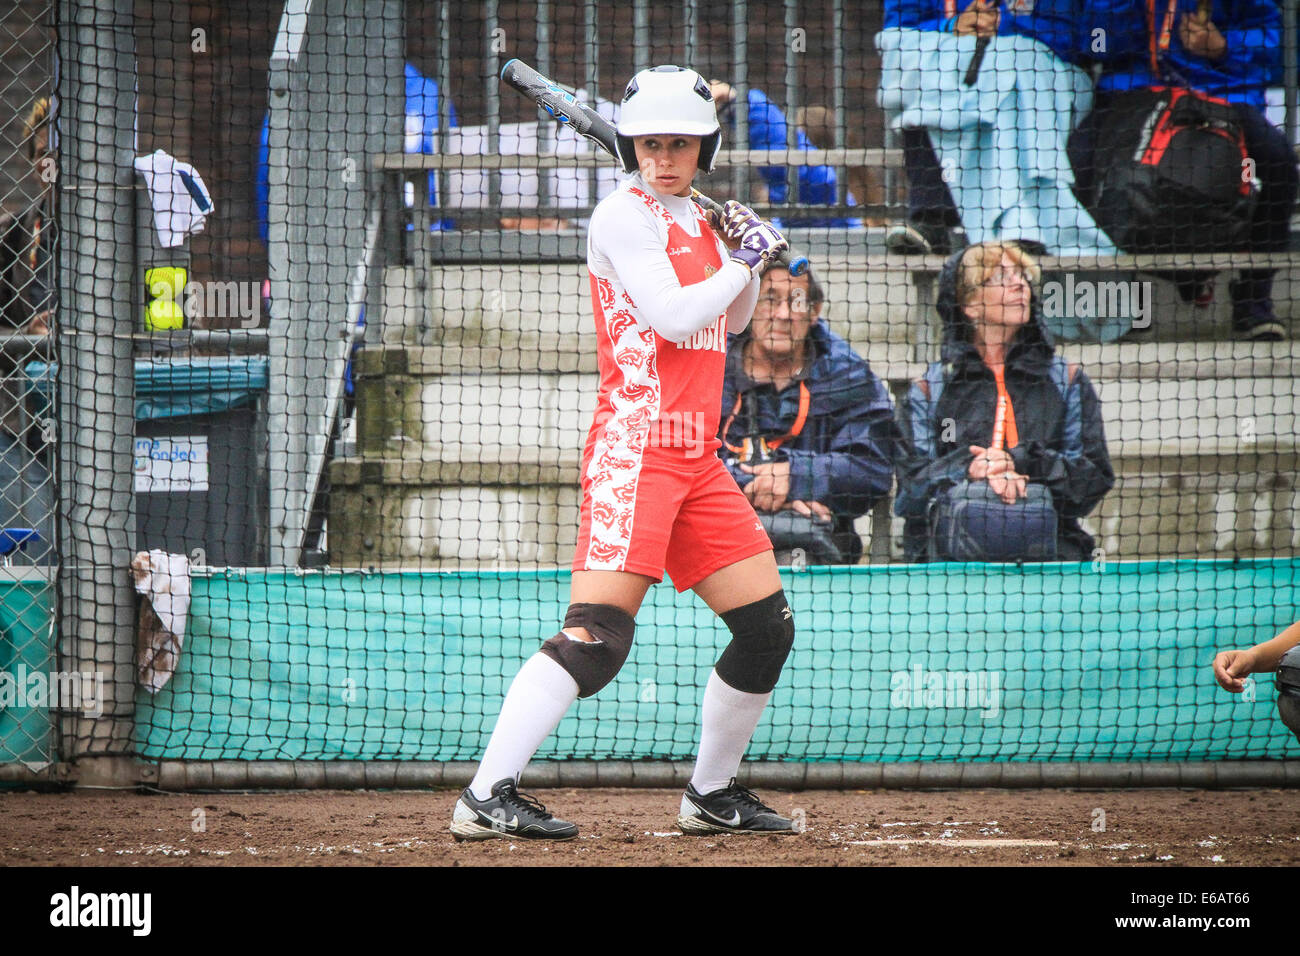 Haarlem, The Netherlands. 17th Aug, 2014. The World Championship Softball, Haarlem, NL, Pictures taken on Sunday August 17, 2014 Credit:  Jan de Wild/Alamy Live News Stock Photo